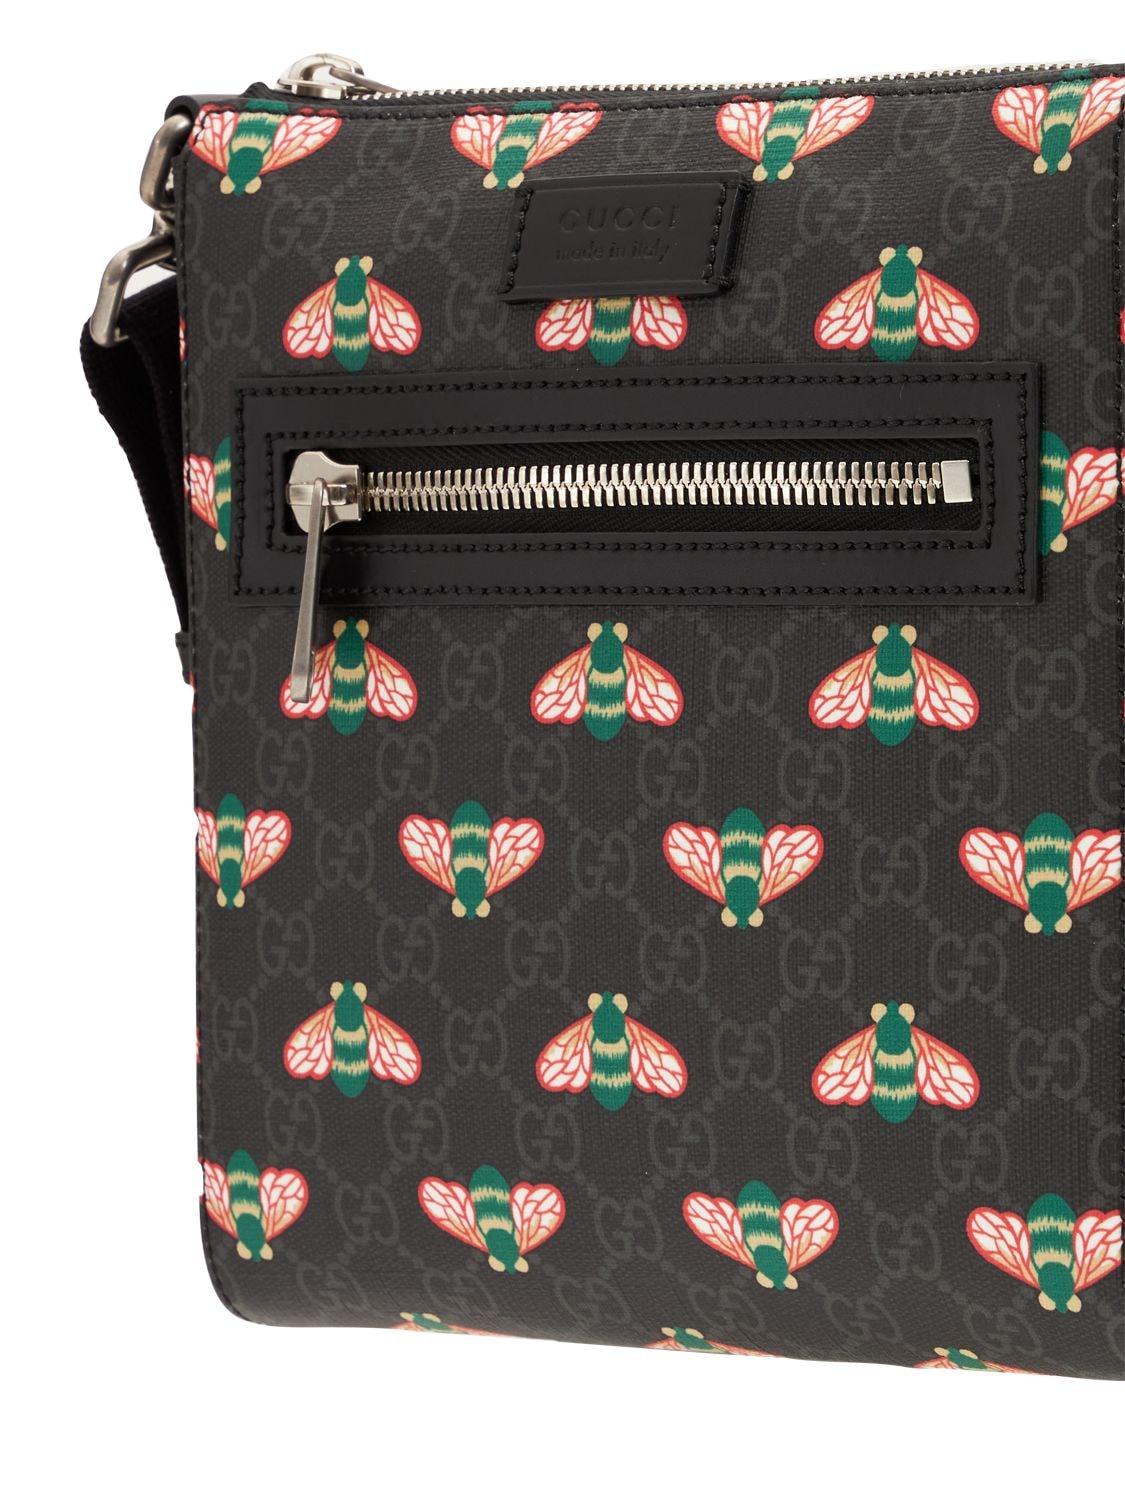 Gucci, Bags, Gucci Black Leather Bestiary Bee Gg Supreme Black Canvas  Cross Body Phone Bag